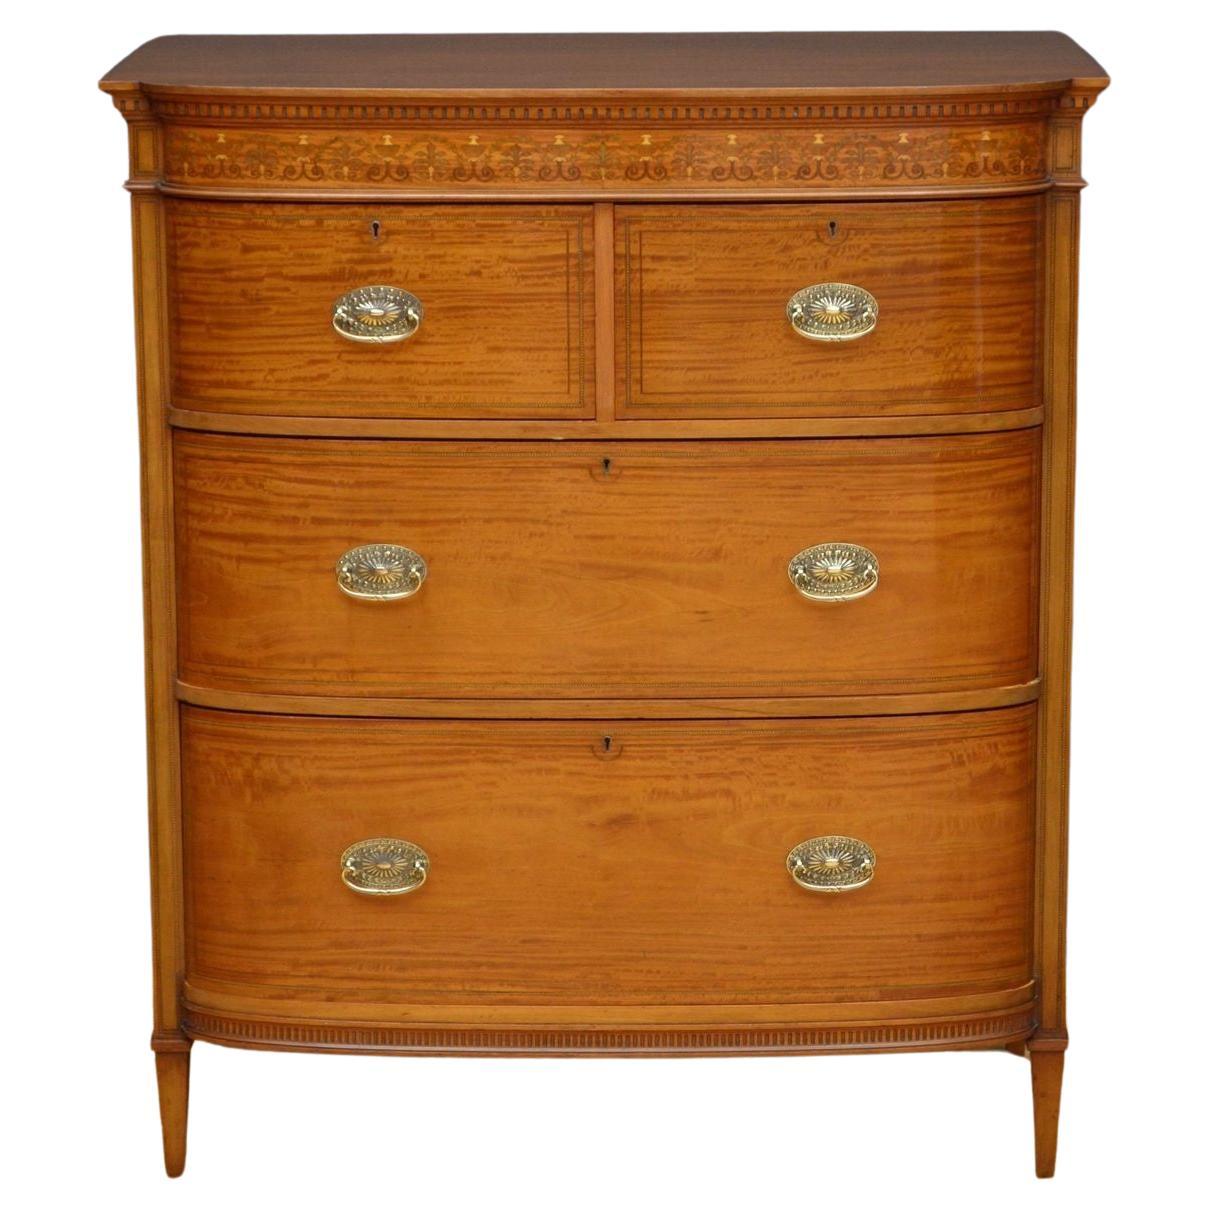 Finest Quality Sheraton Revival Satinwood Chest of Drawers